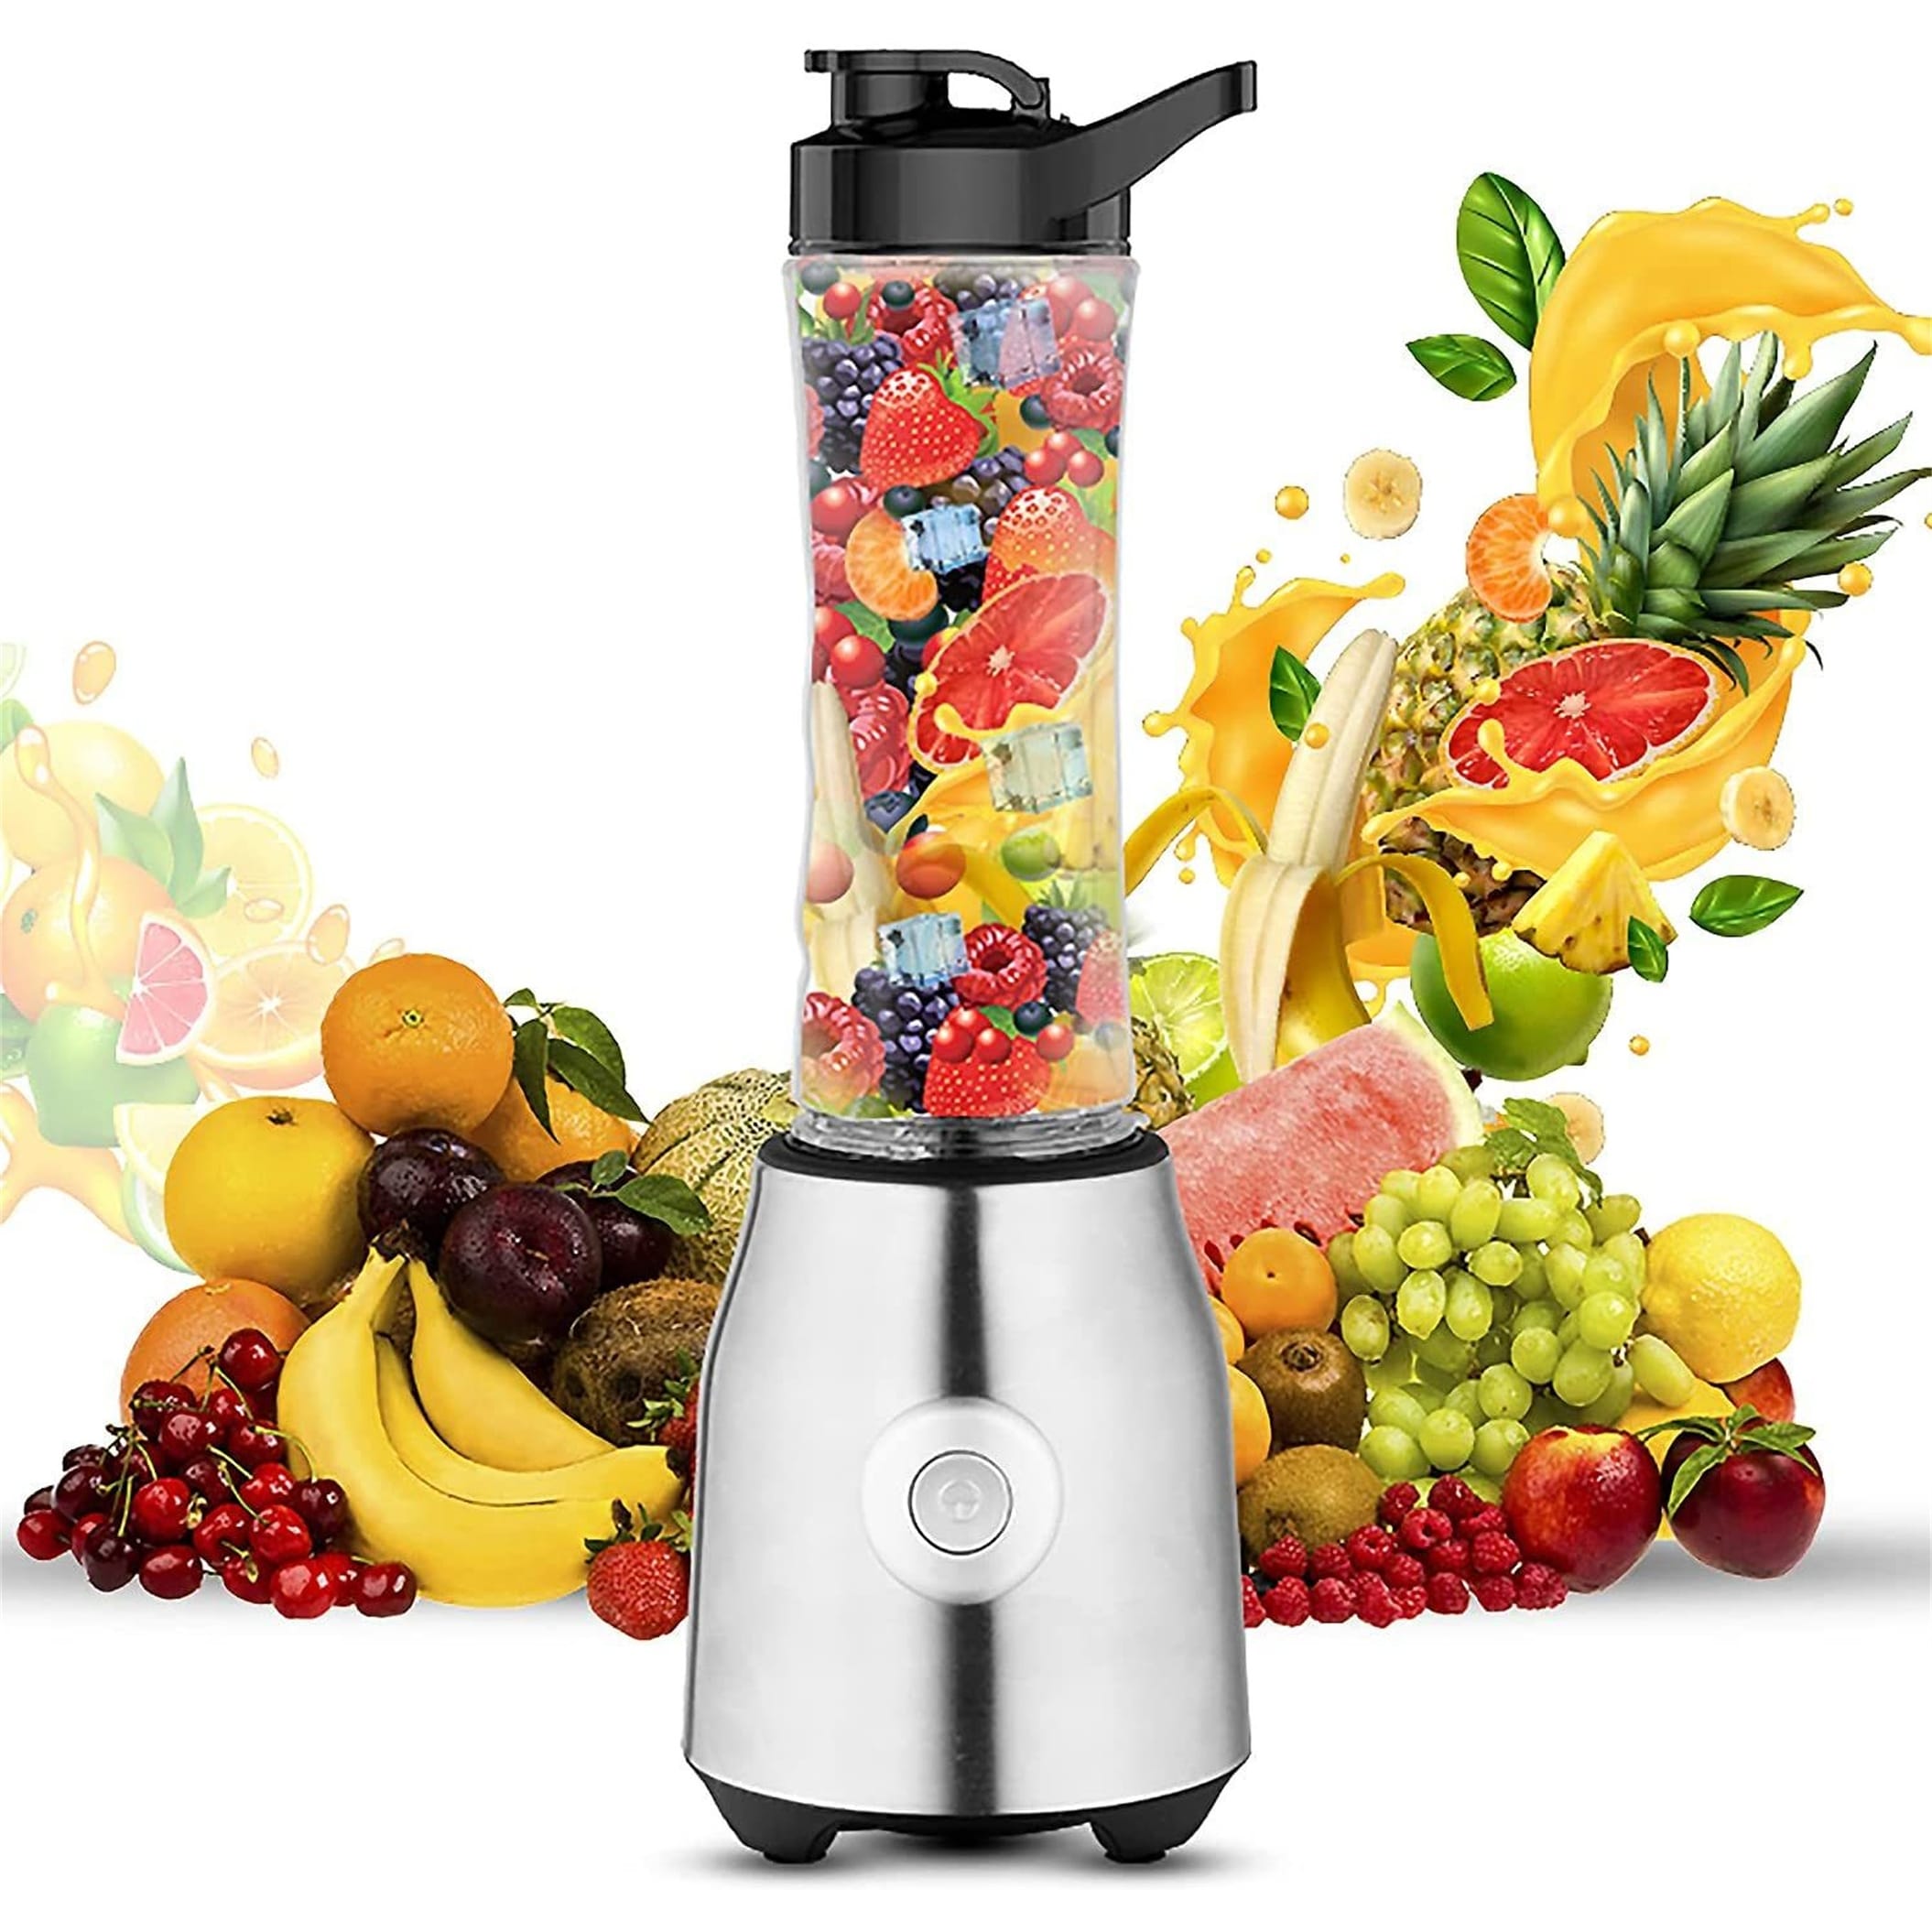 https://ak1.ostkcdn.com/images/products/is/images/direct/b95e66b8db8f62636ade0a9458eb84fc42b3ca17/Blender-Electric-Blenders-Smoothie-Shake-Mixer-Food-Blend-Grind-%281Cup%29.jpg